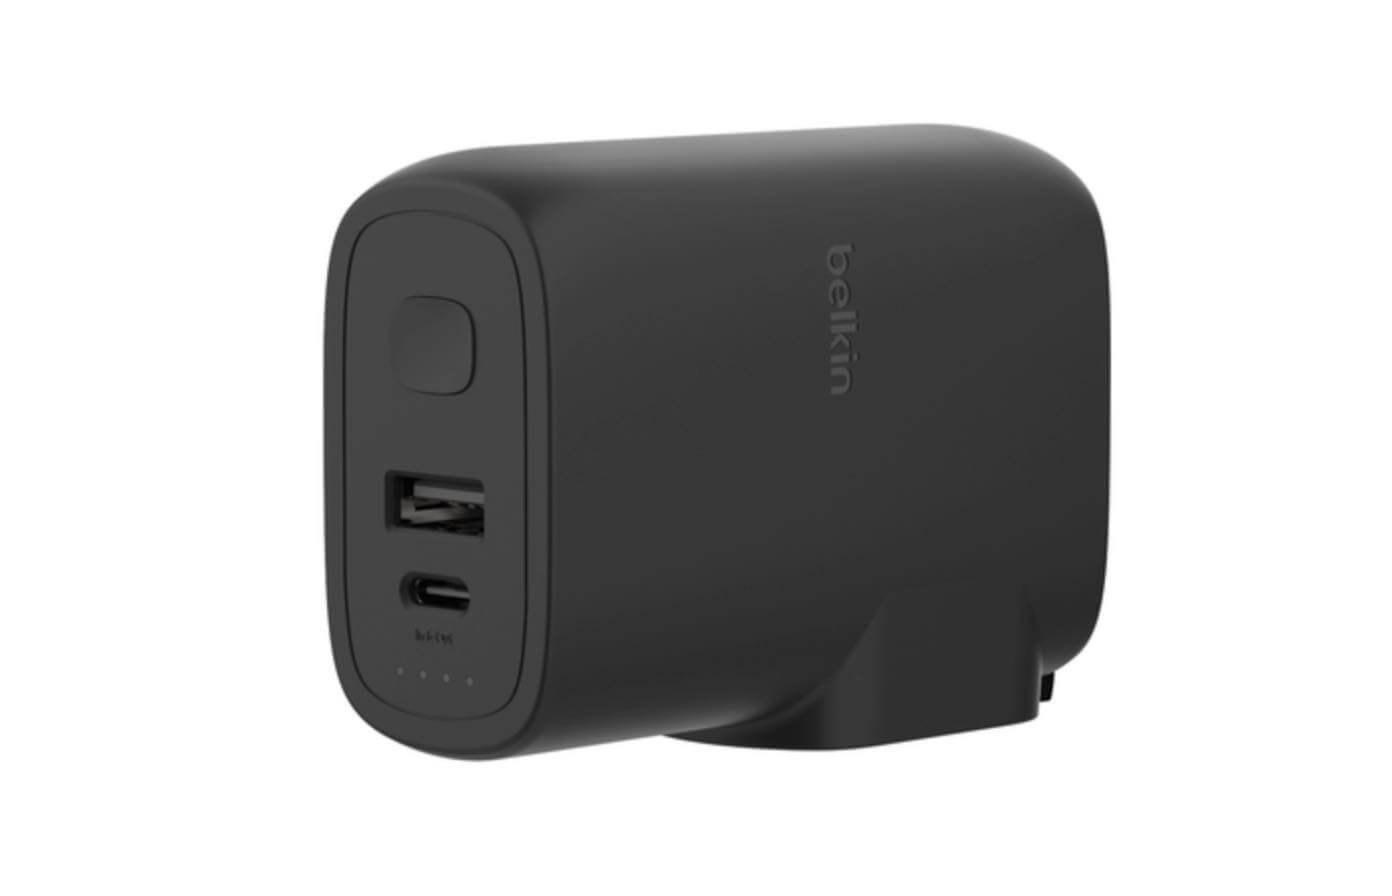 Belkin、USB充電器とモバイルバッテリーが1つになった｢Belkin BoostCharge Hybird Charger 25W + Power Bank 5000｣を発売